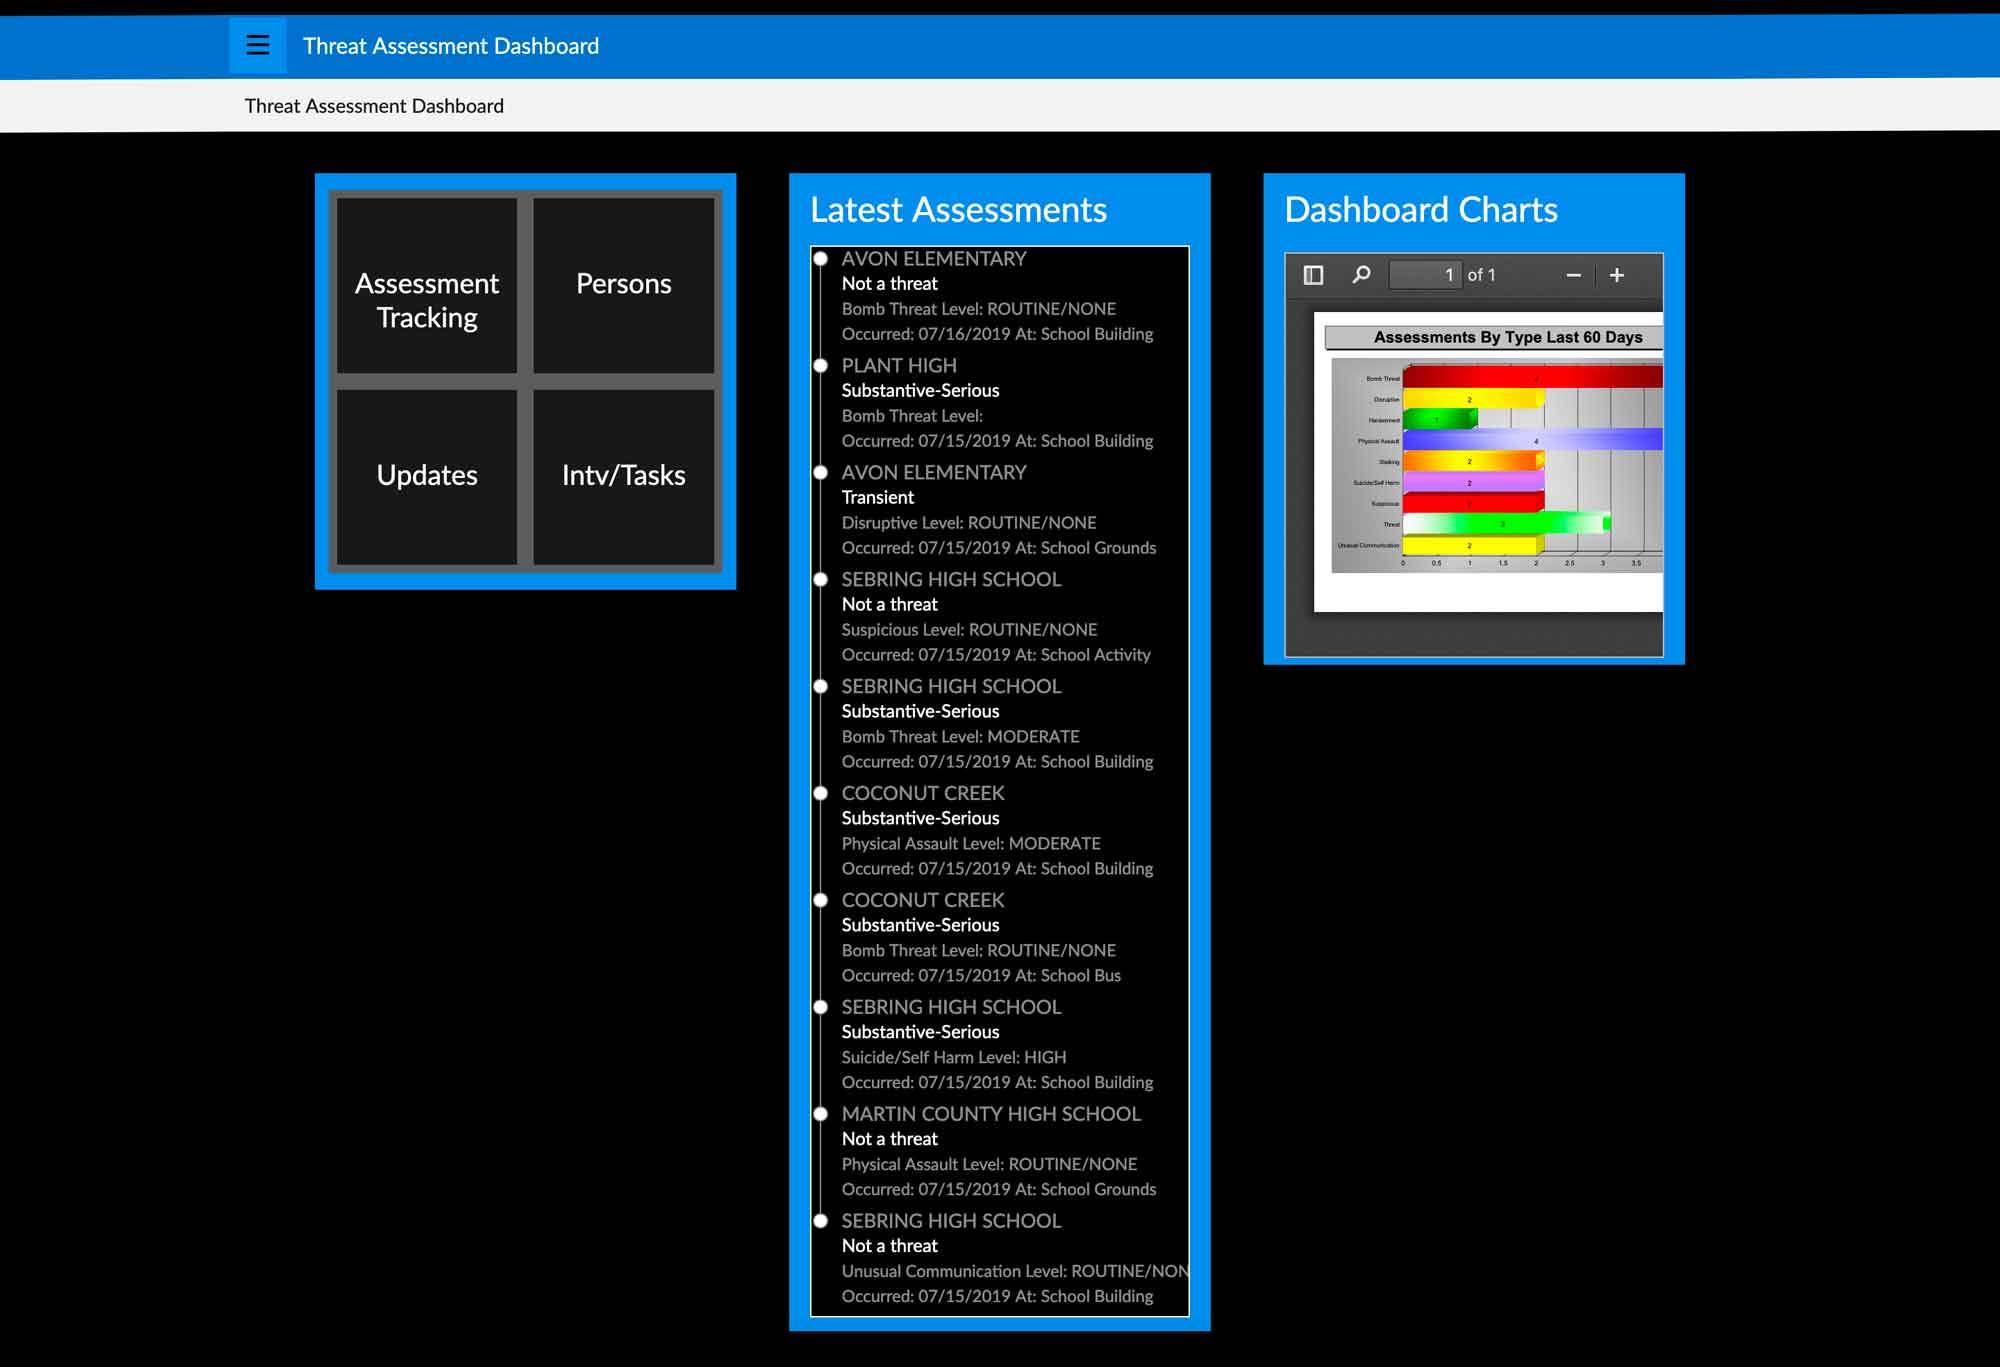 dashboard view - threat assessment tracking by USA Software